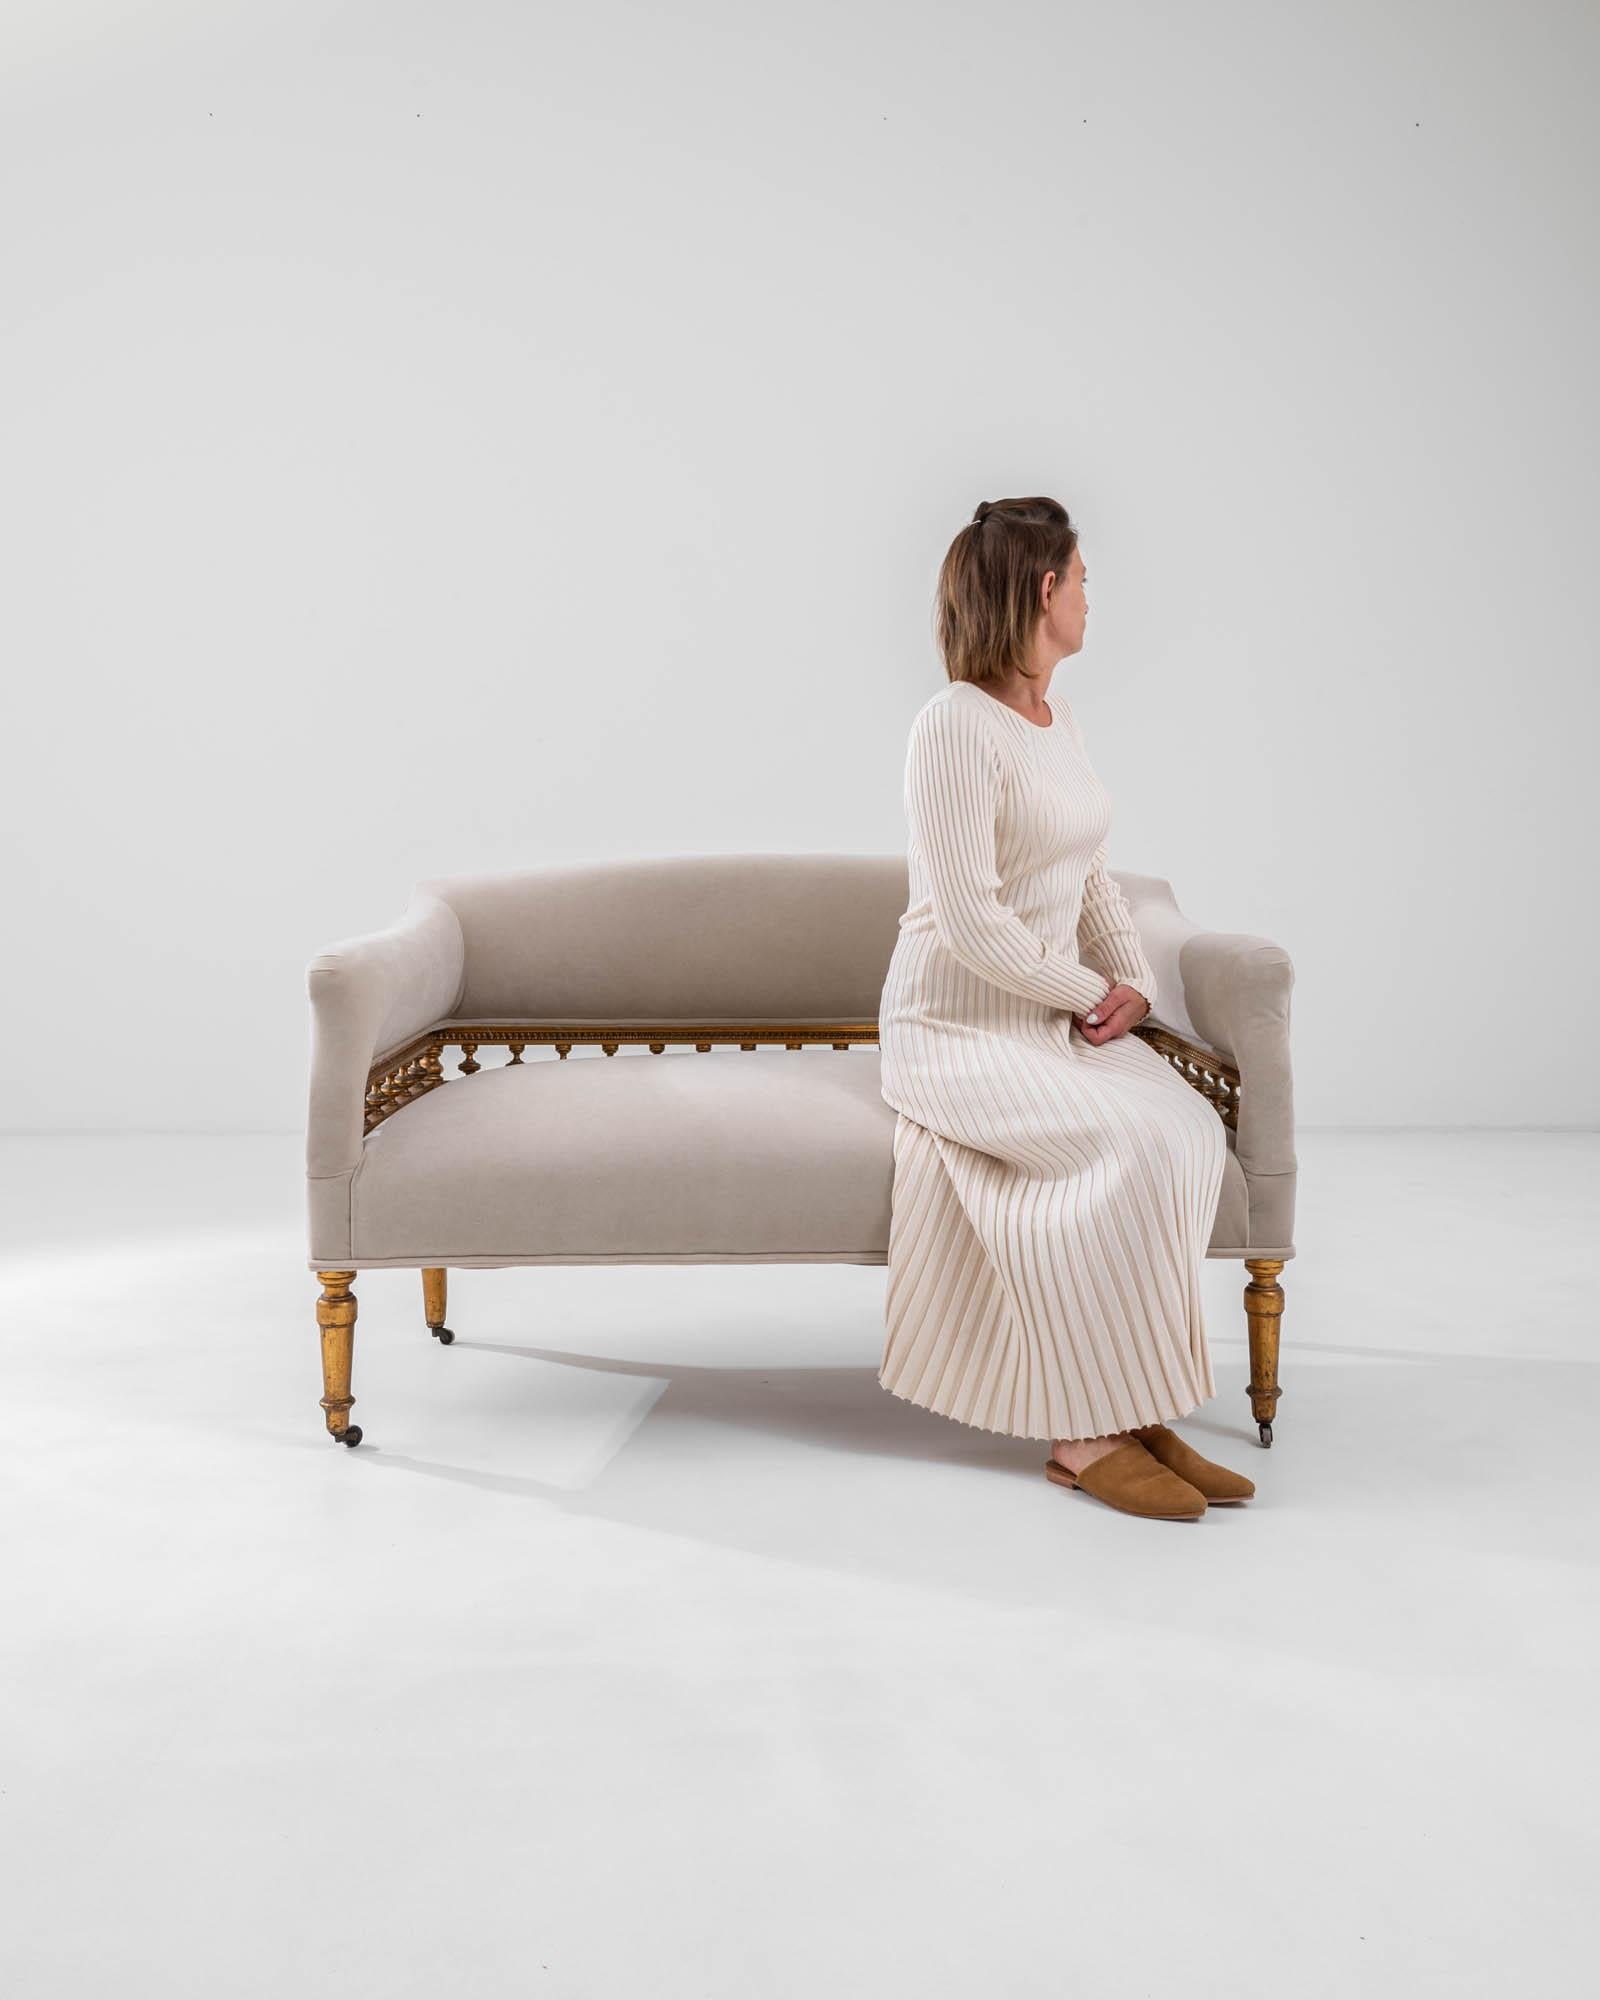 Indulge in the refined comfort of this 19th Century French White Upholstered Sofa. Characterized by beautifully turned spindles and gracefully flared armrests, this sofa is a true testament to the elegance of 19th-century design. The pristine white